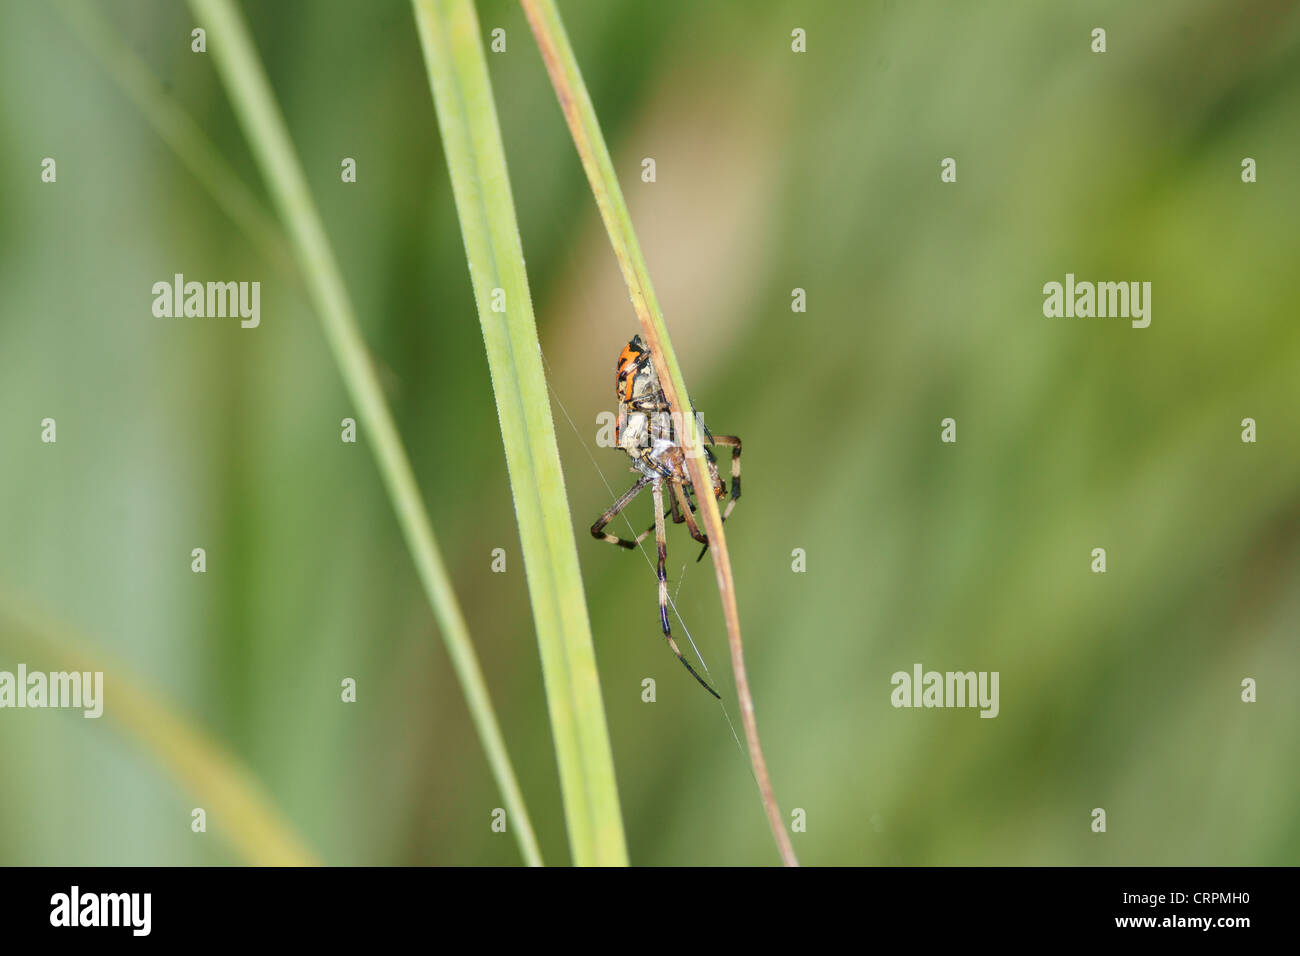 Phidippus jumping spider with larger Argiope lobata spider as prey Stock Photo